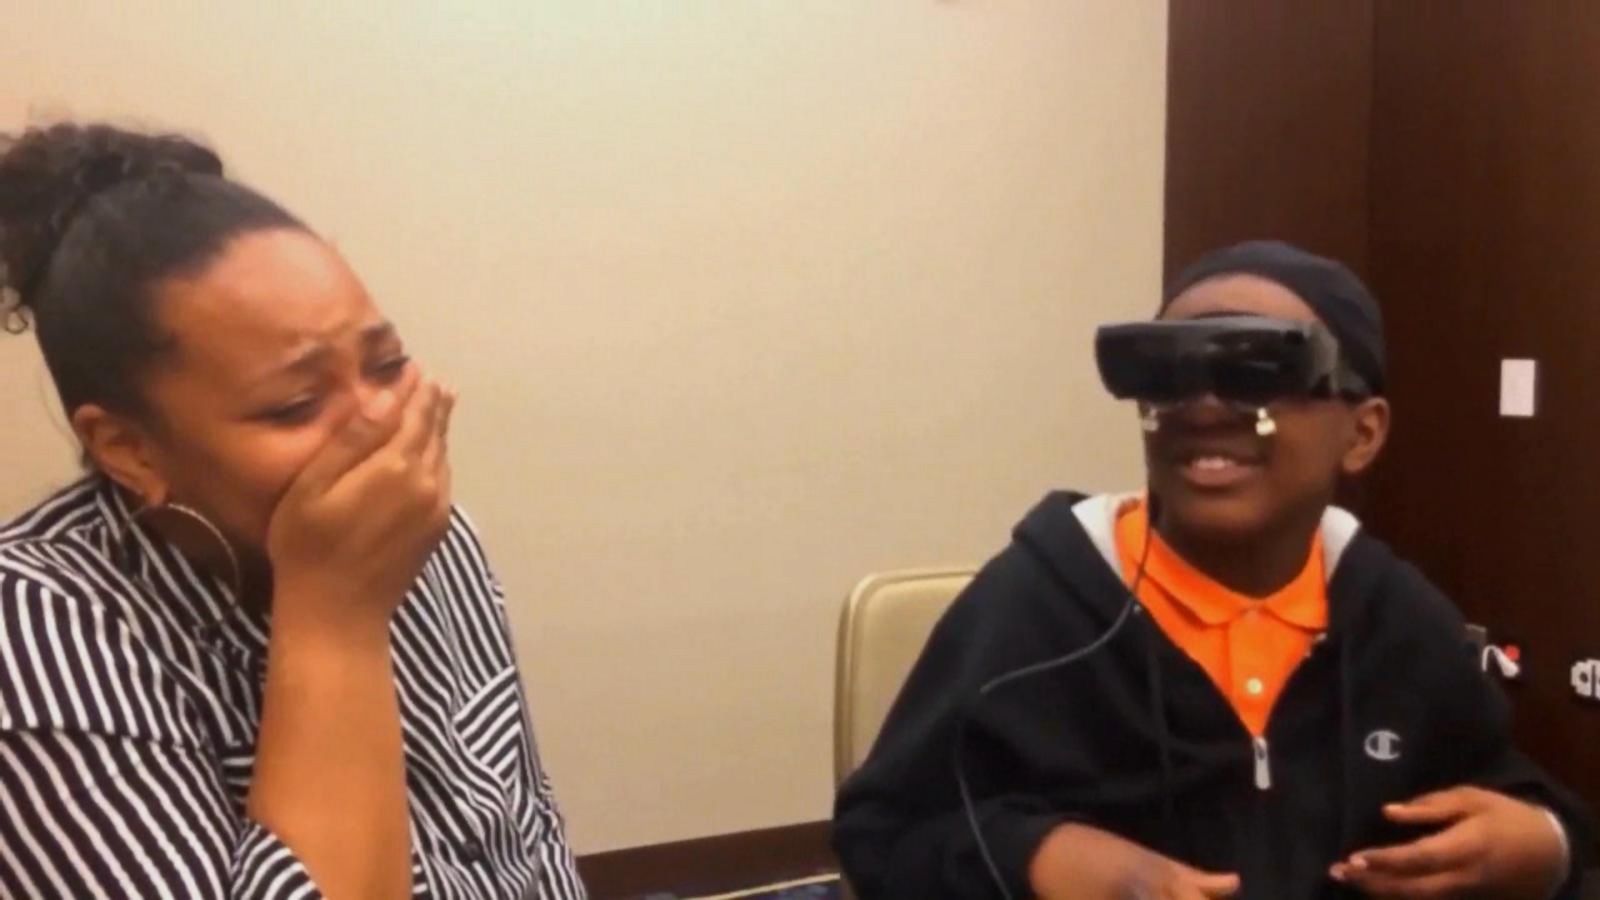 Legally Grader Sees Mother 1st Time Through Electronic Glasses - ABC News